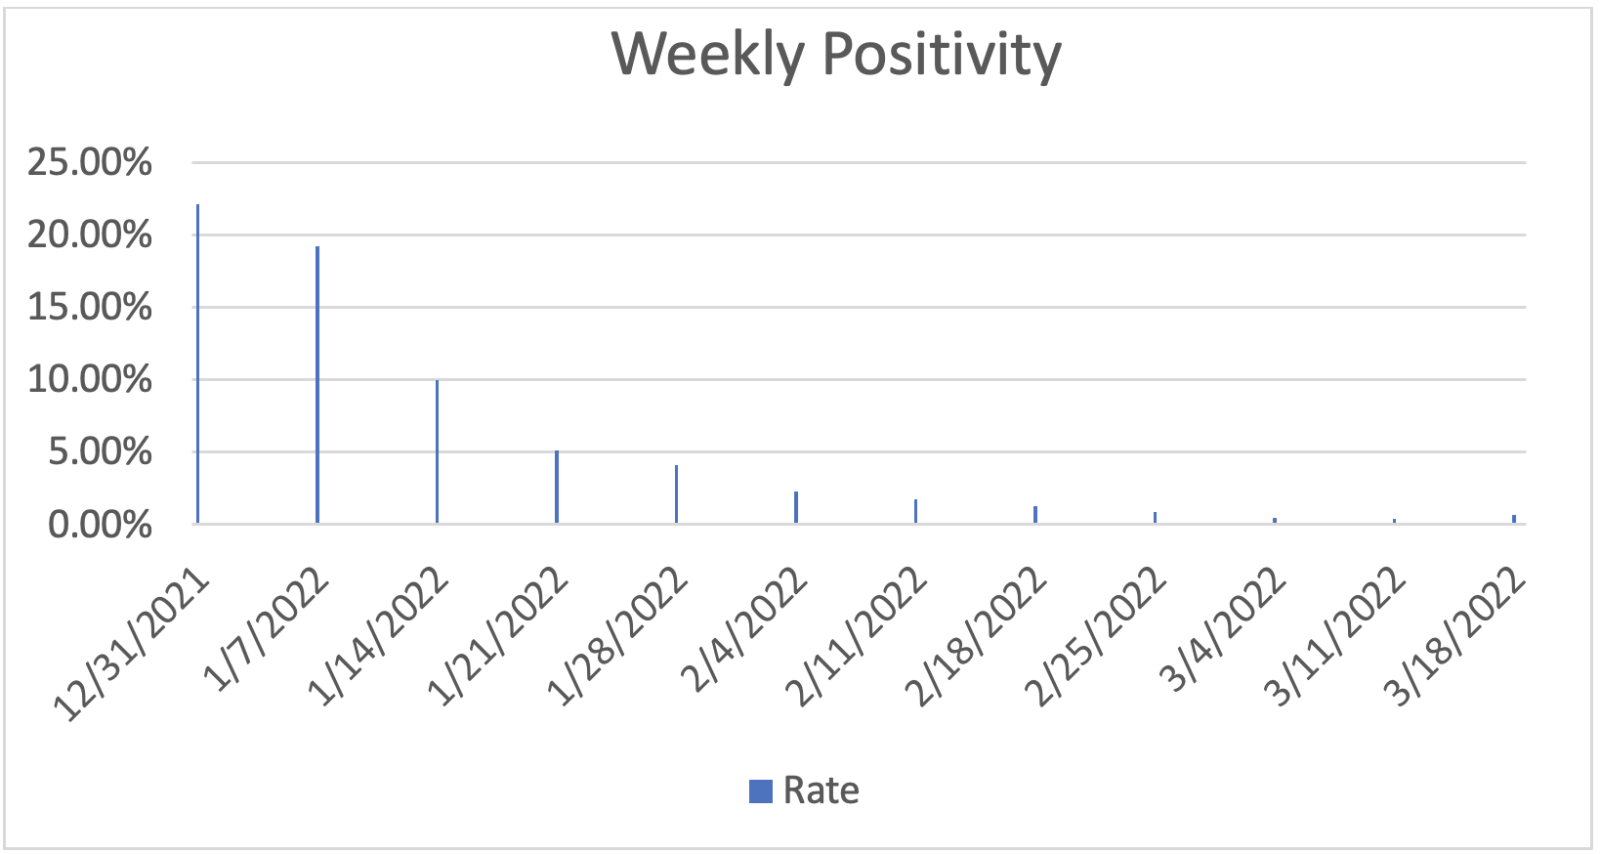 Weekly Positivity Rate